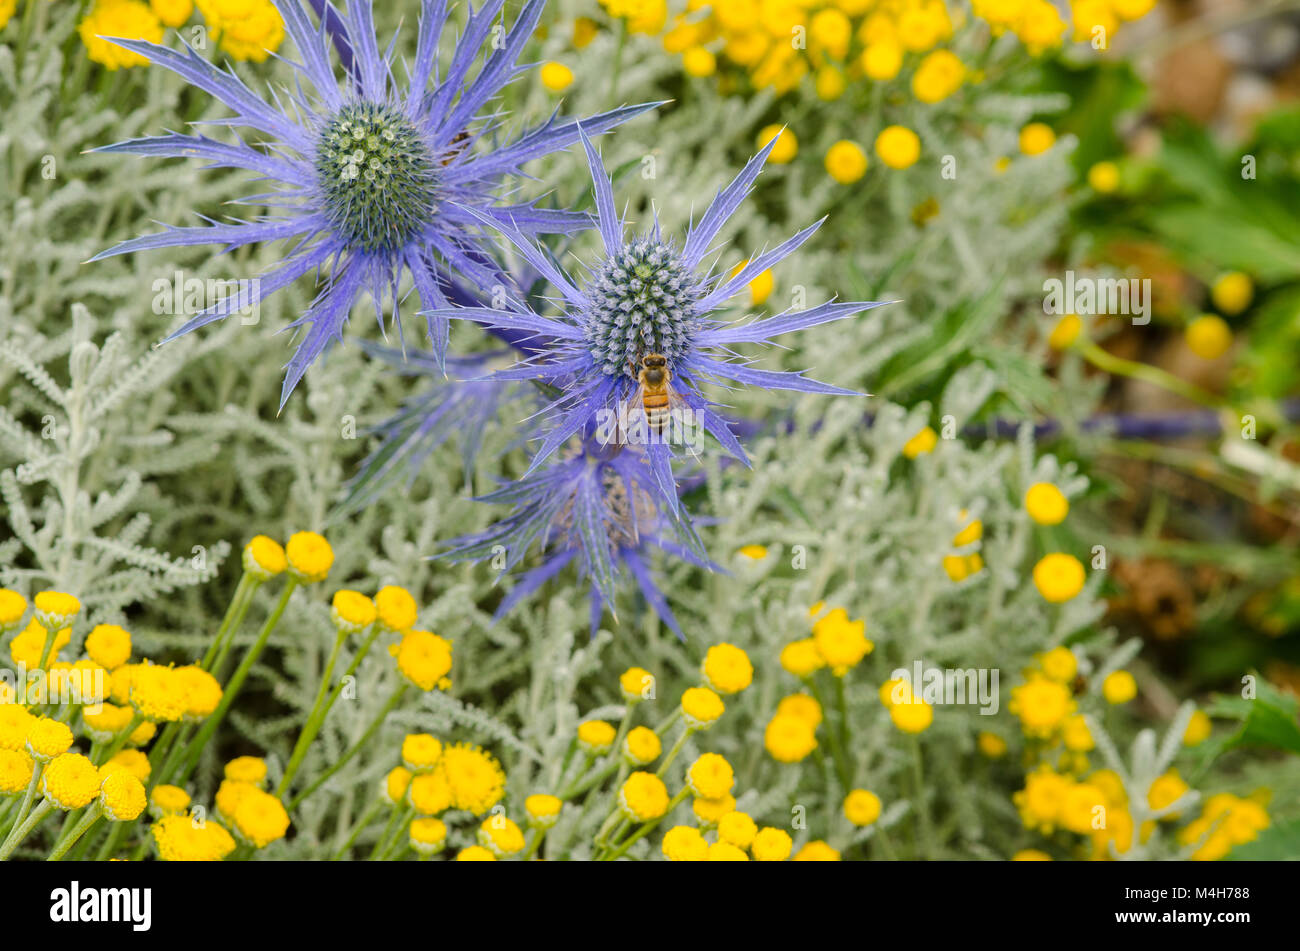 Sea holly with bee Stock Photo